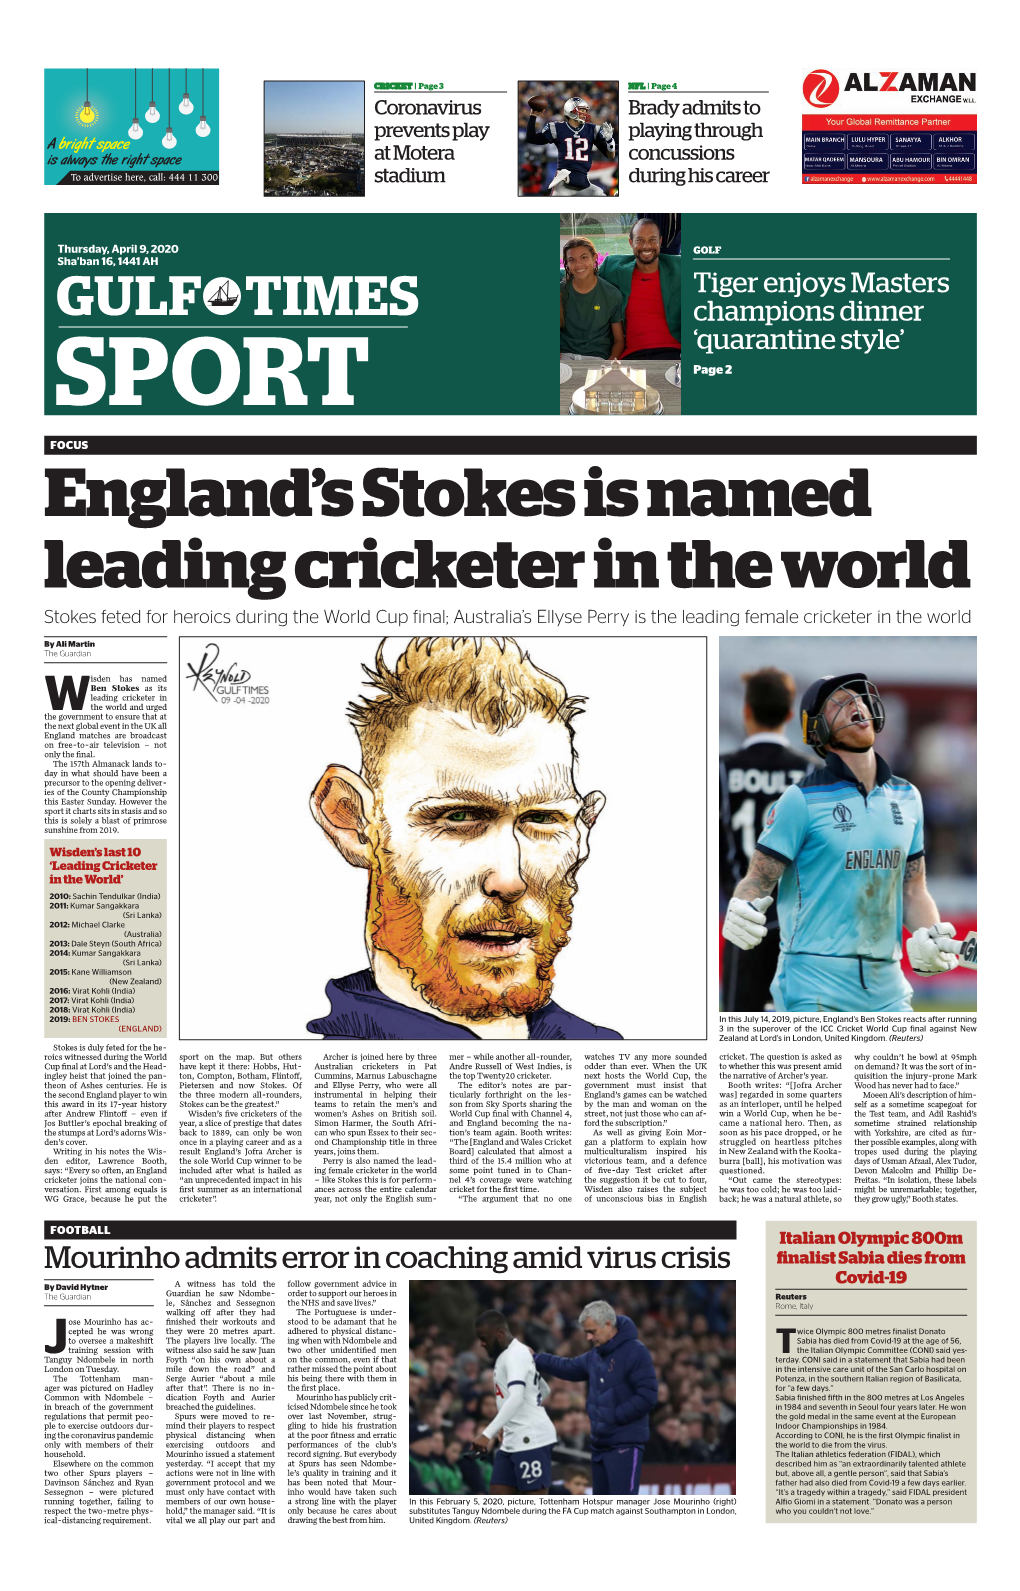 England's Stokes Is Named Leading Cricketer in the World